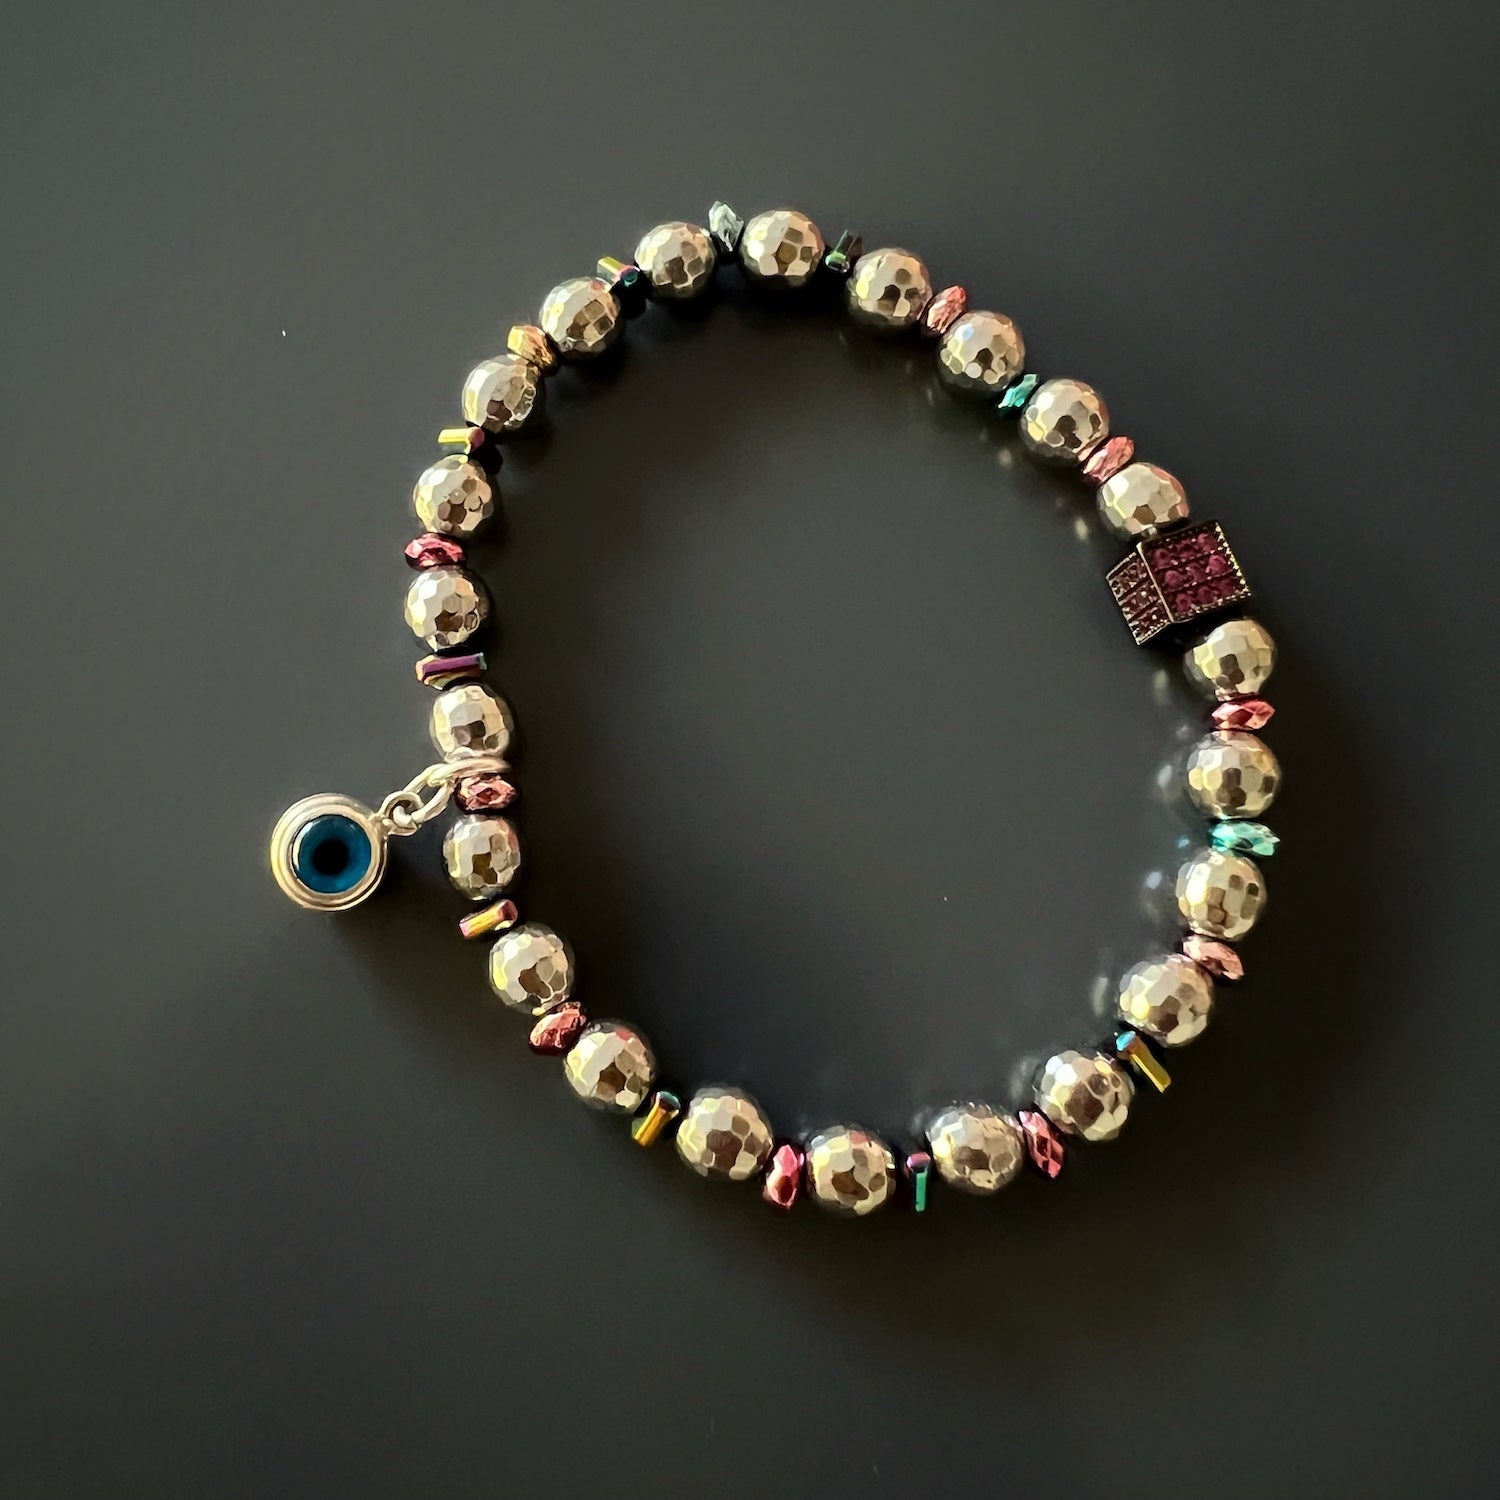 Handmade Eye Protection Bracelet Set - Combination of silver hematite beads, Evil Eye charms, and pink/blue hematite spacers for a stylish and protective accessory